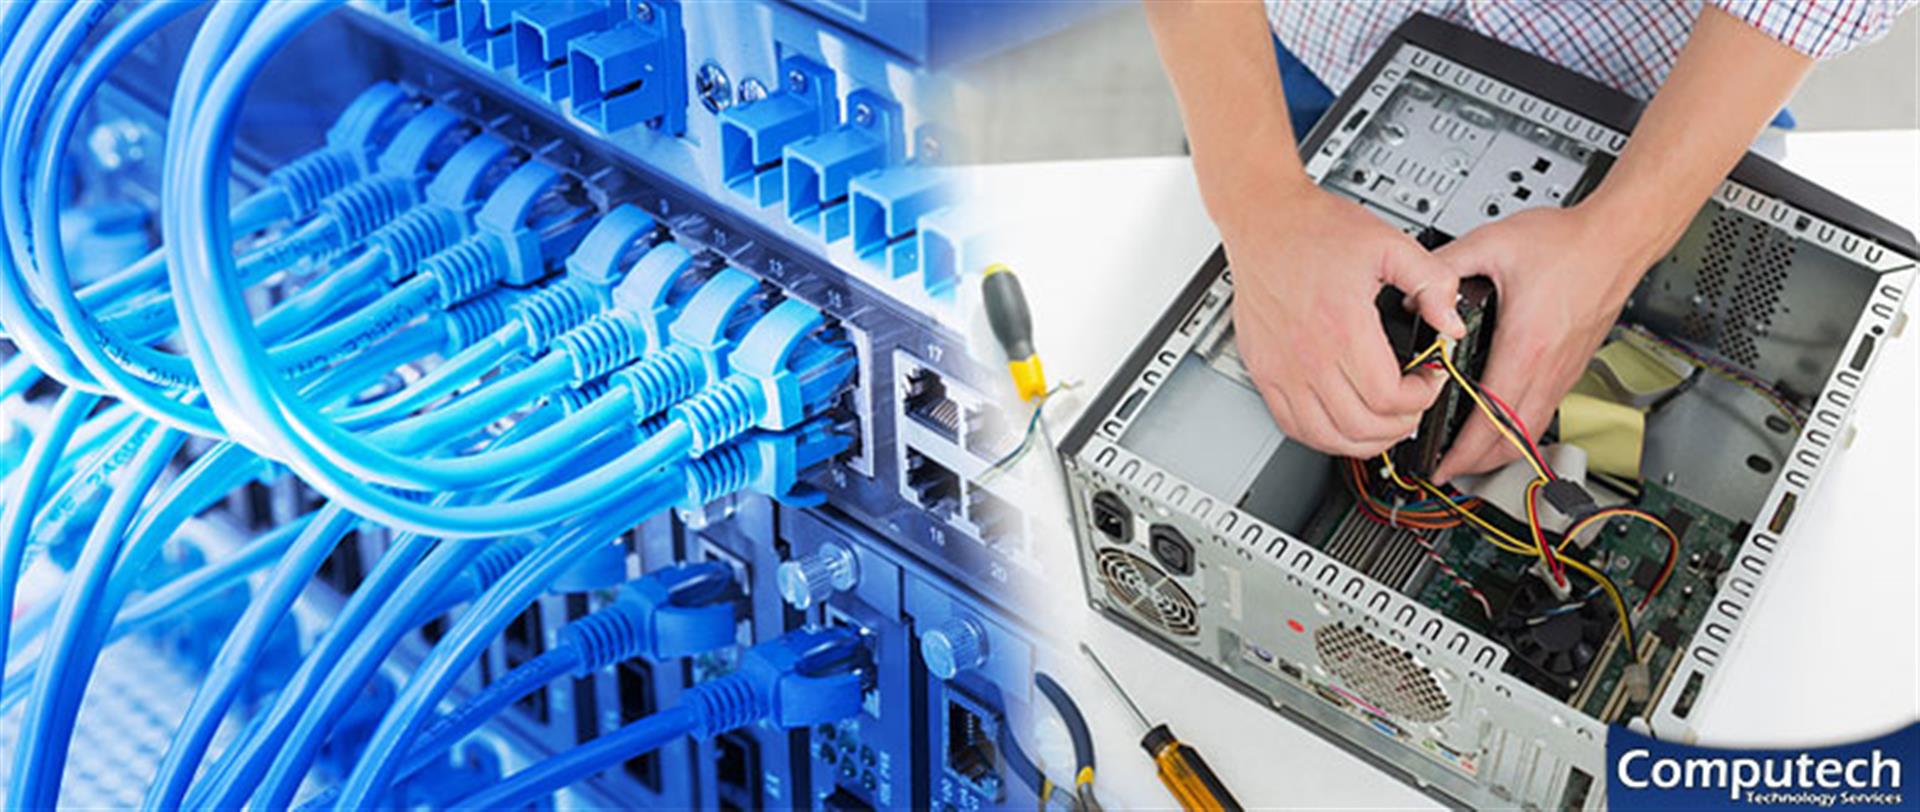 Columbia Tennessee Onsite PC and Printer Repairs, Networking, Voice & Data Cabling Solutions